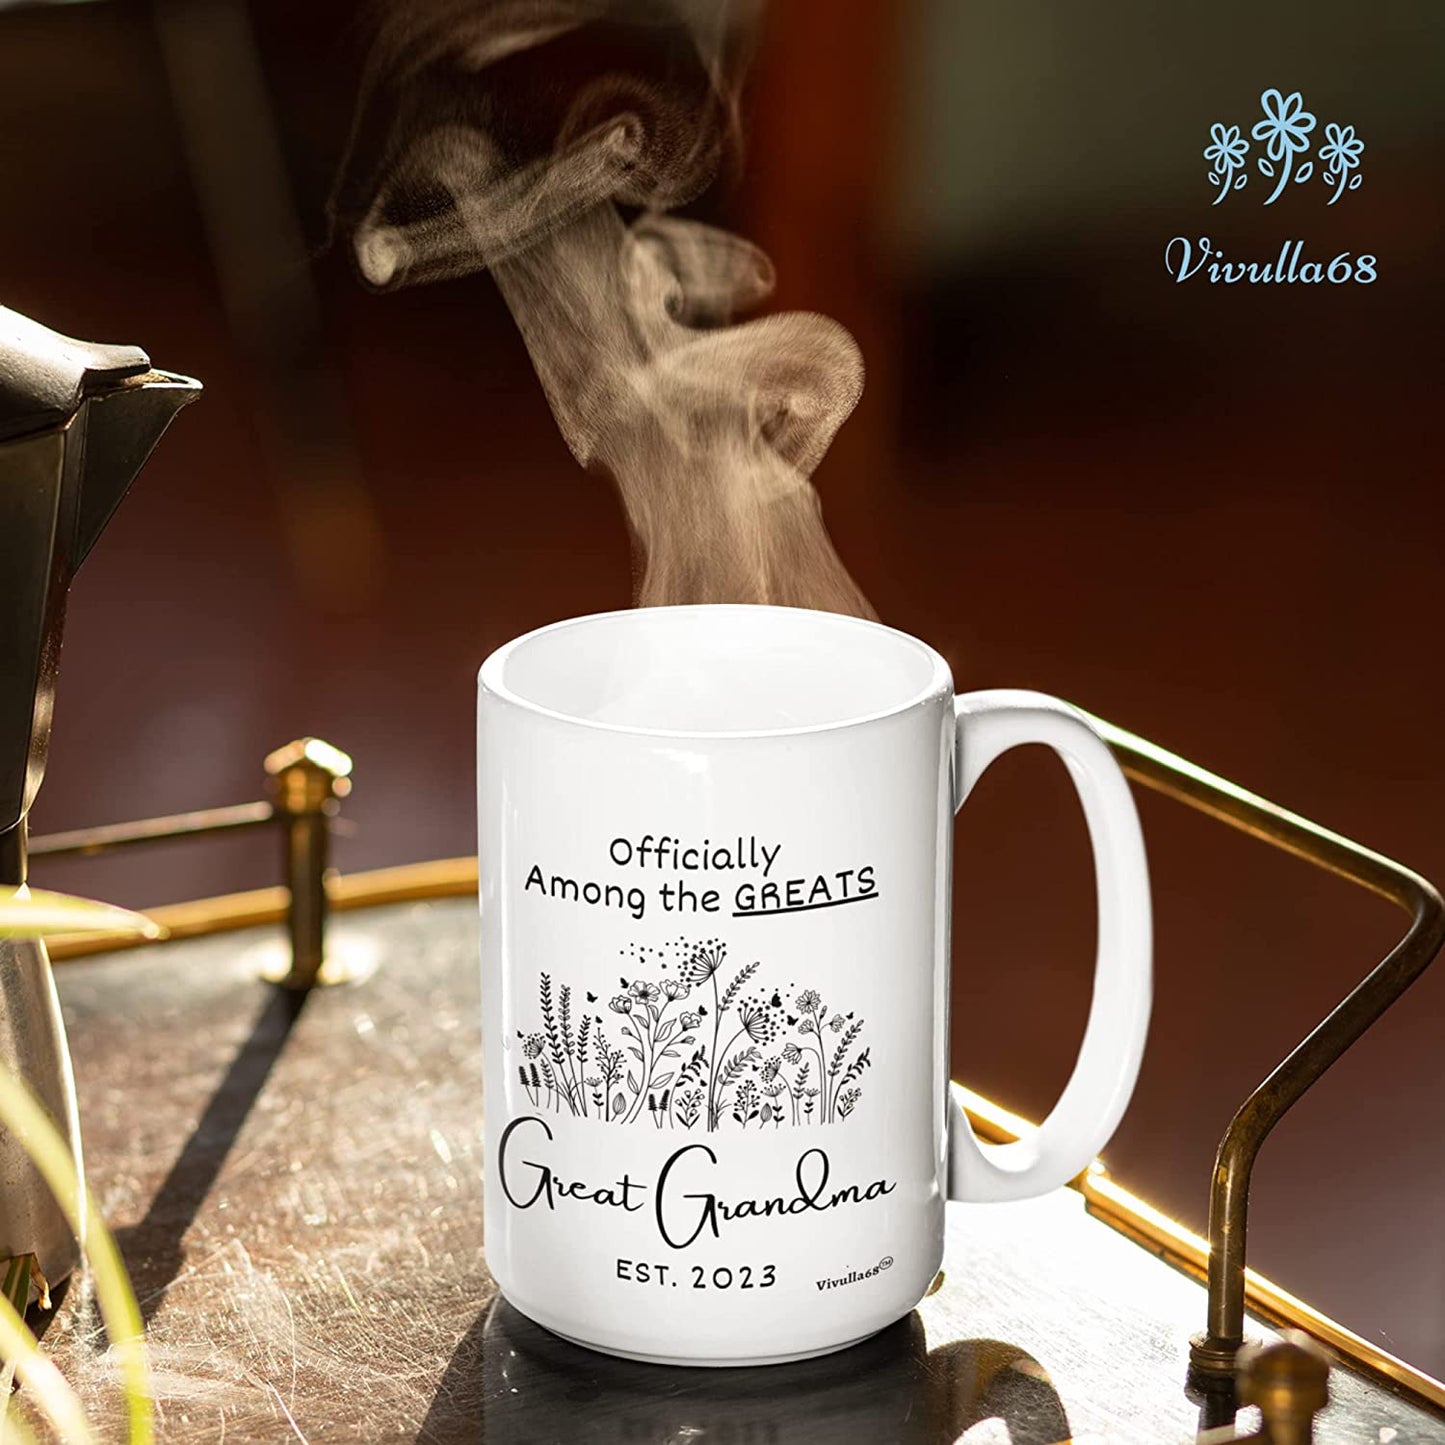 Great Grandma 15 Oz Mug 2023, New Great Grandma Gifts, Youre Going To Be Great Grandparents Gifts, Presents For Great Grandma Pregnancy Announcement, Happy Mothers Day Gifts for Great Grandmother